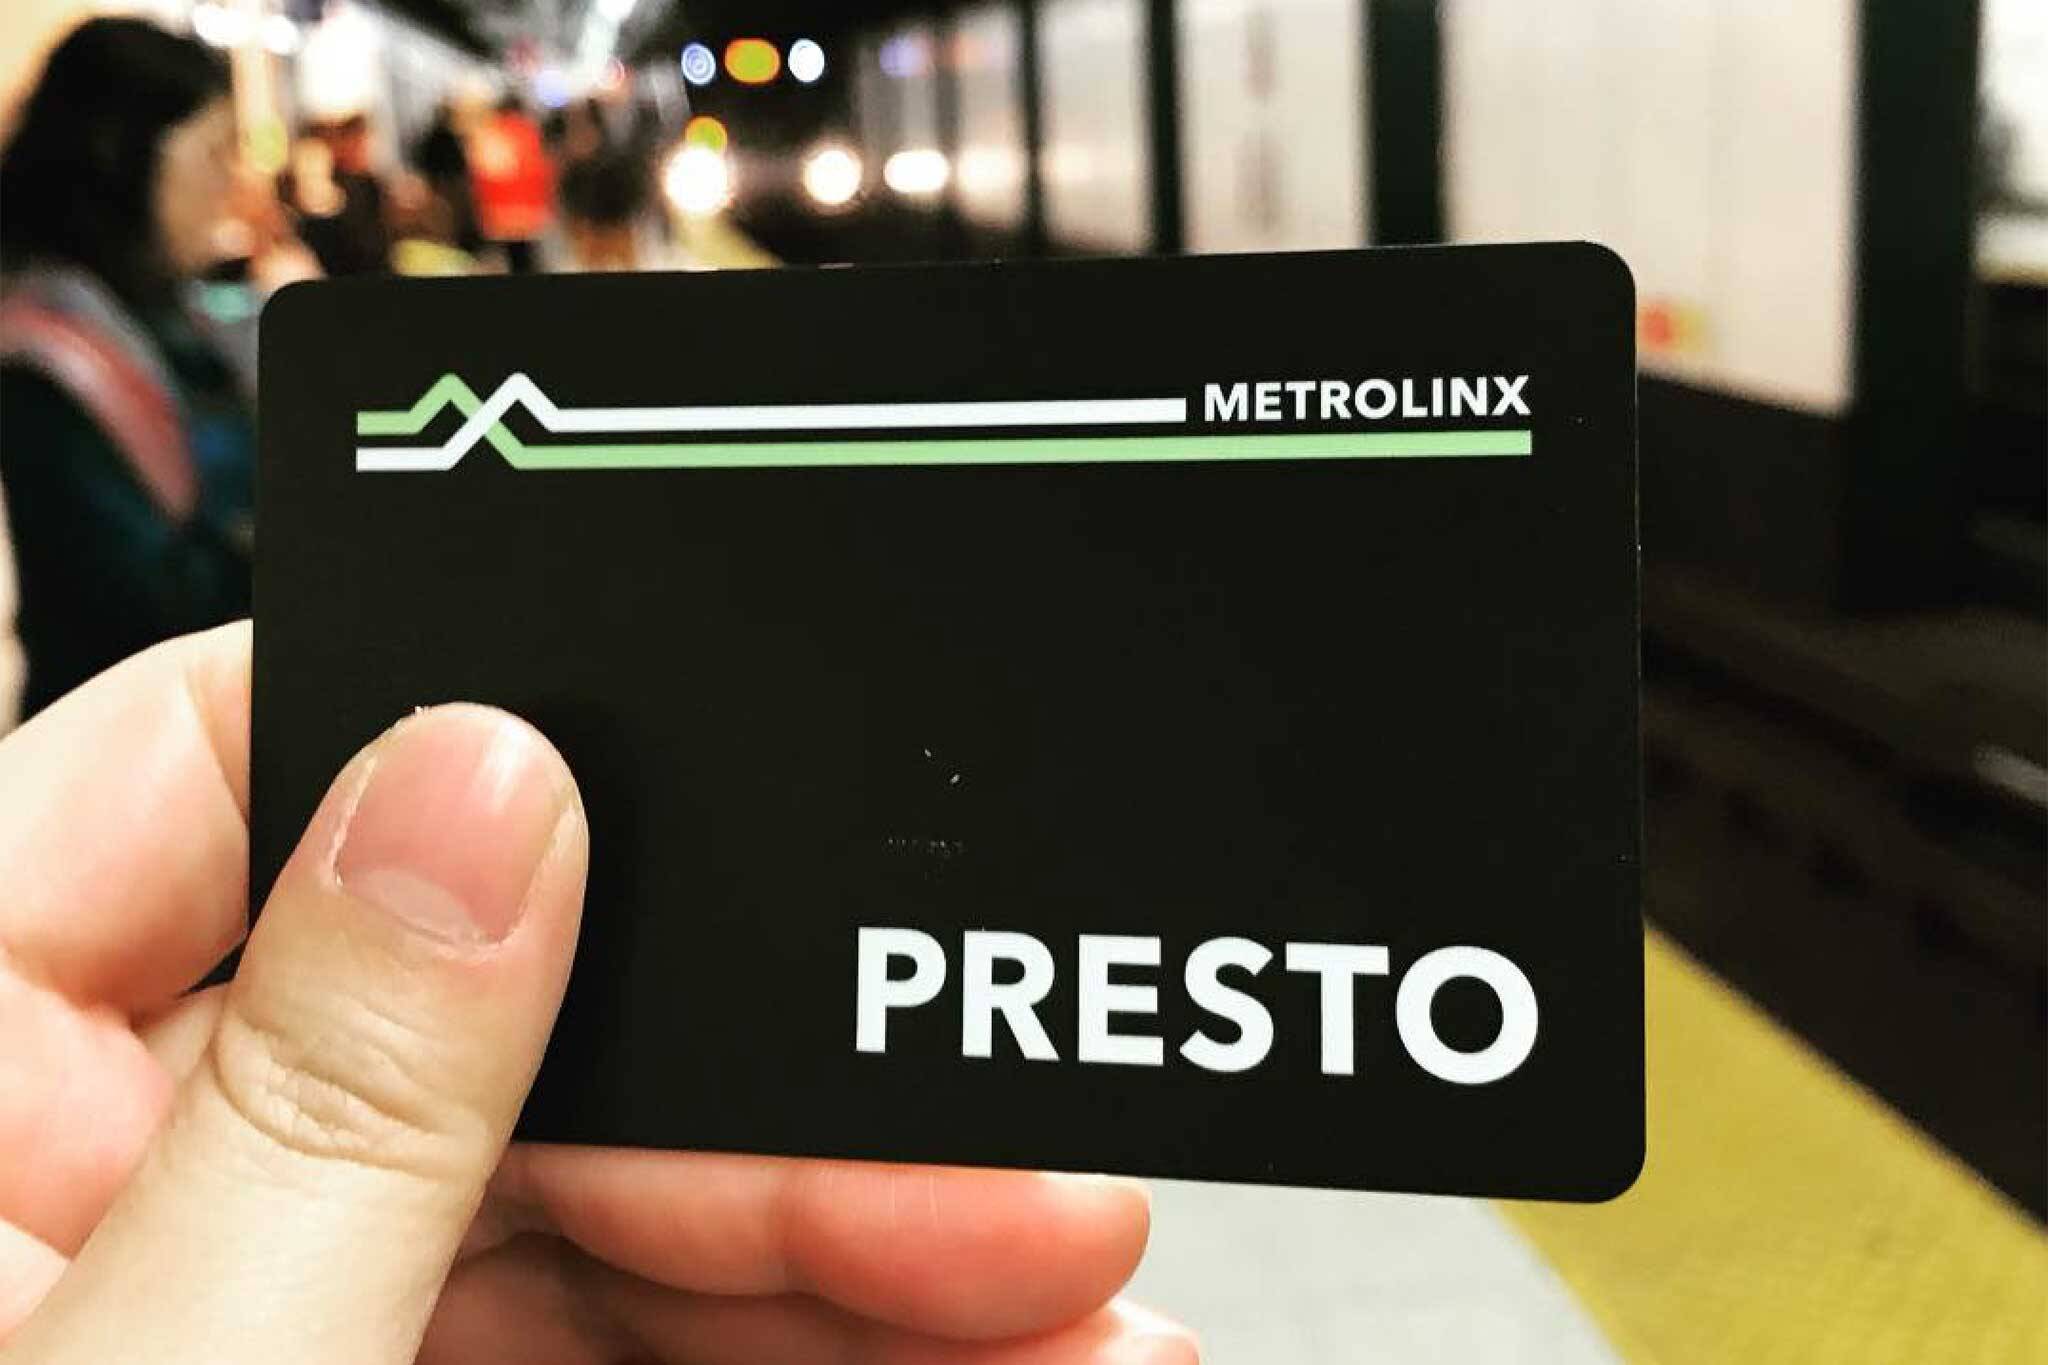 thousands-of-free-presto-cards-are-being-given-away-in-toronto-today